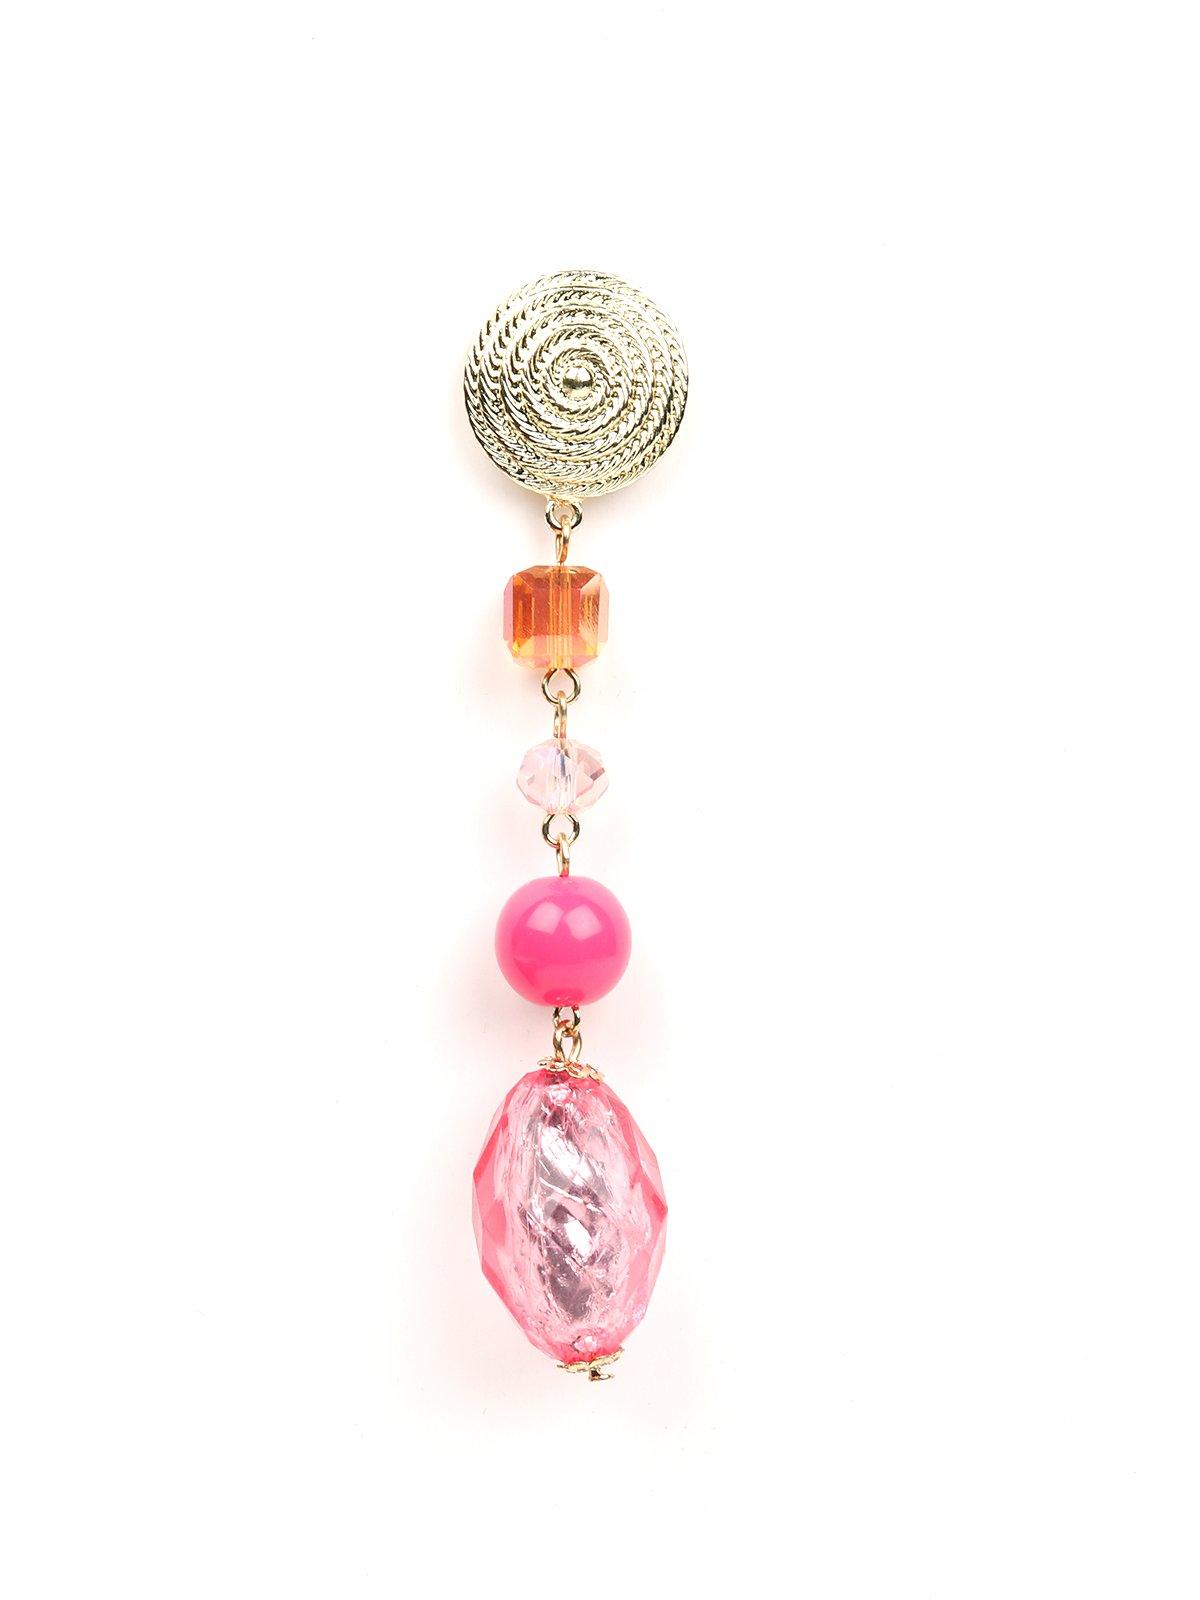 Women's Stunning Gold And Pink Drop Long Earring - Odette